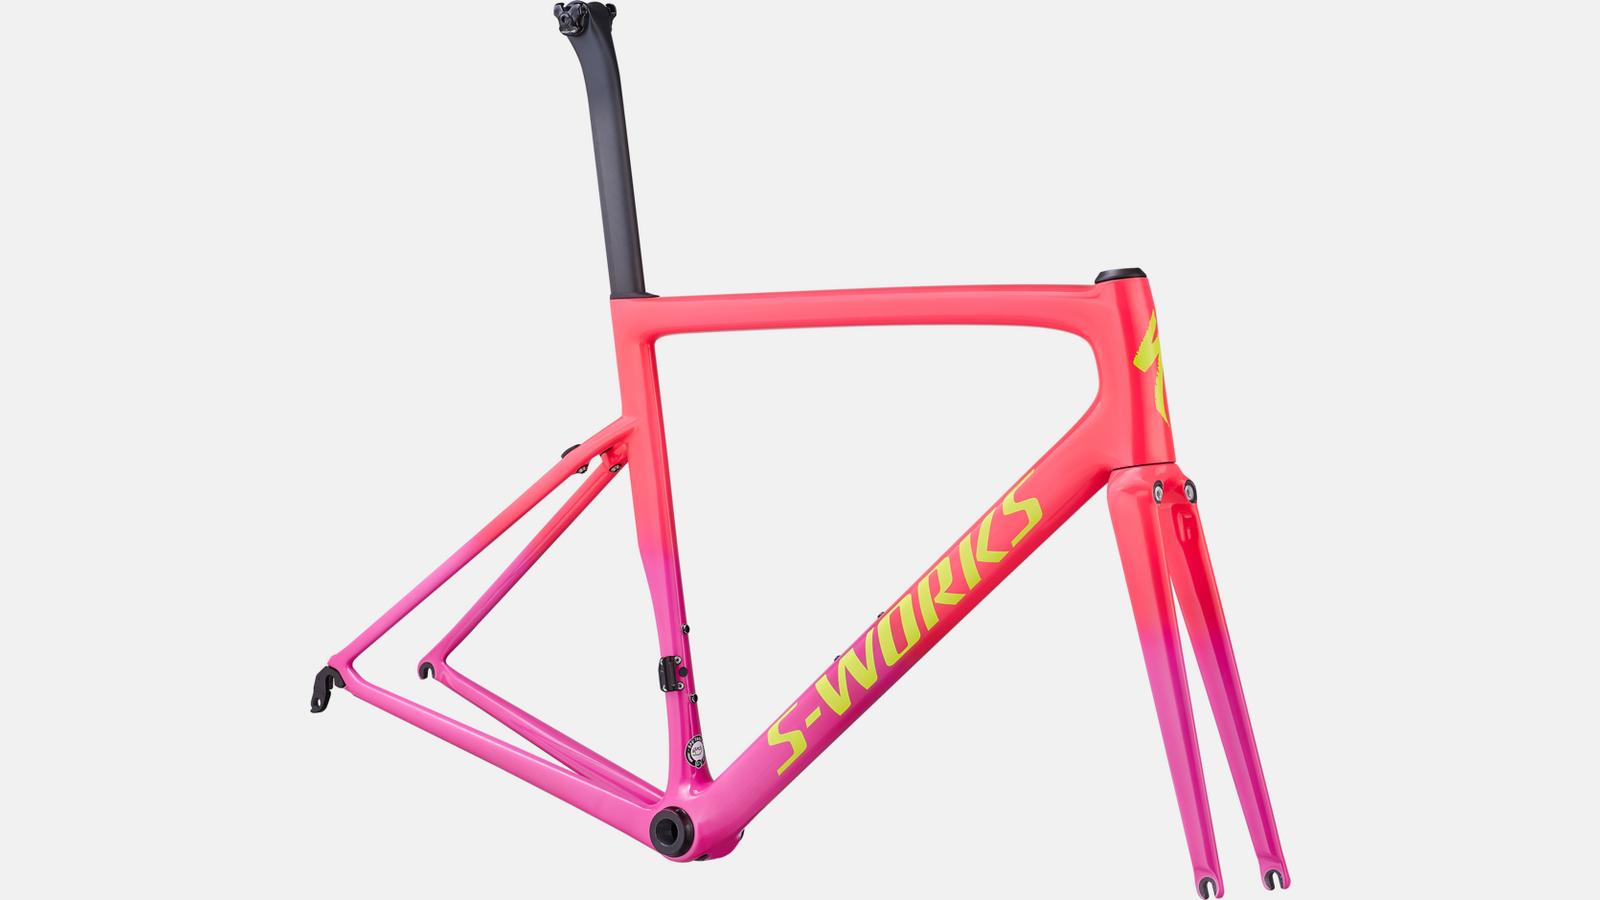 Paint for 2019 Specialized S-Works Tarmac SL6 Frameset - Gloss Acid Pink